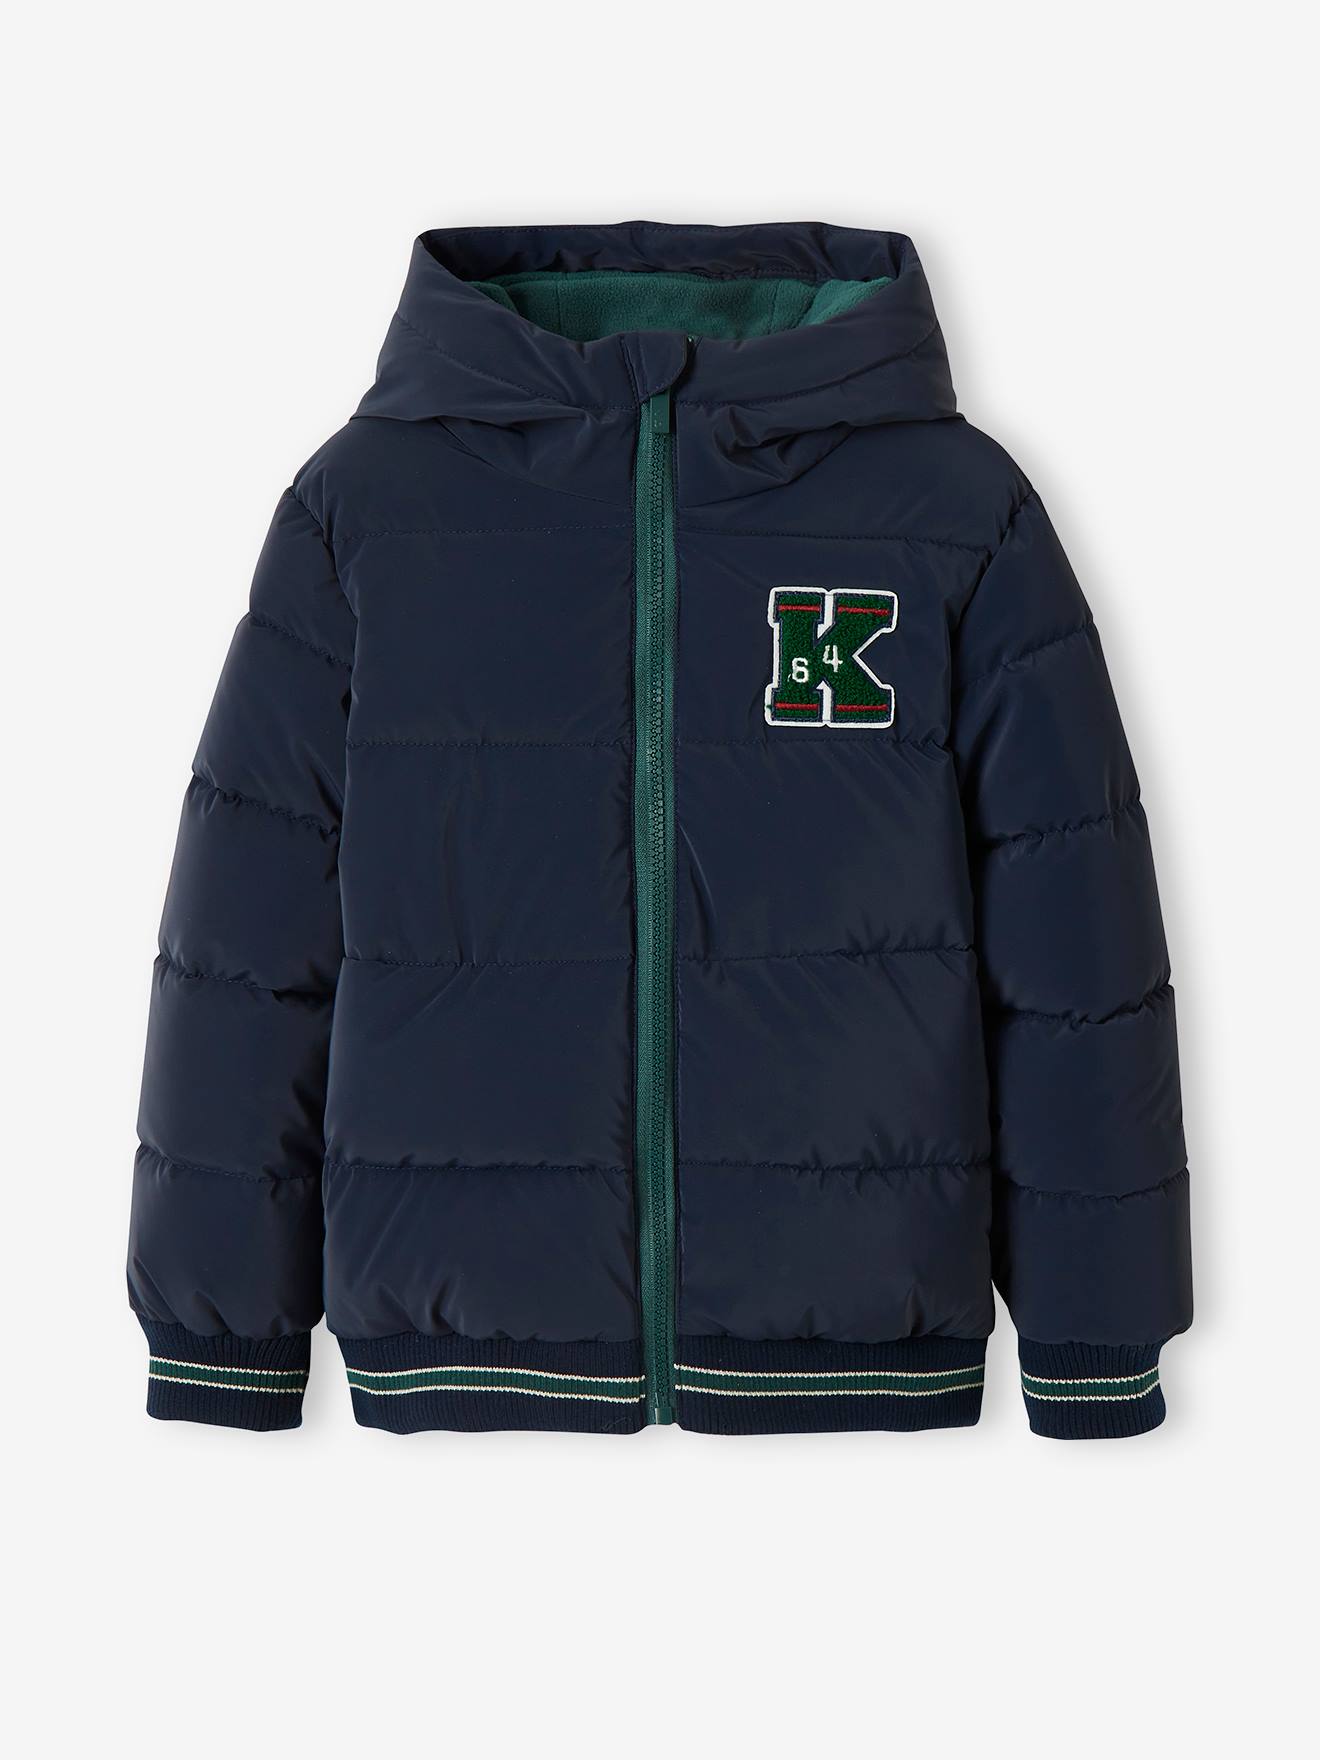 College Style Padded Jacket with Badge & Lined in Polar Fleece for Boys -  blue bright solid with design